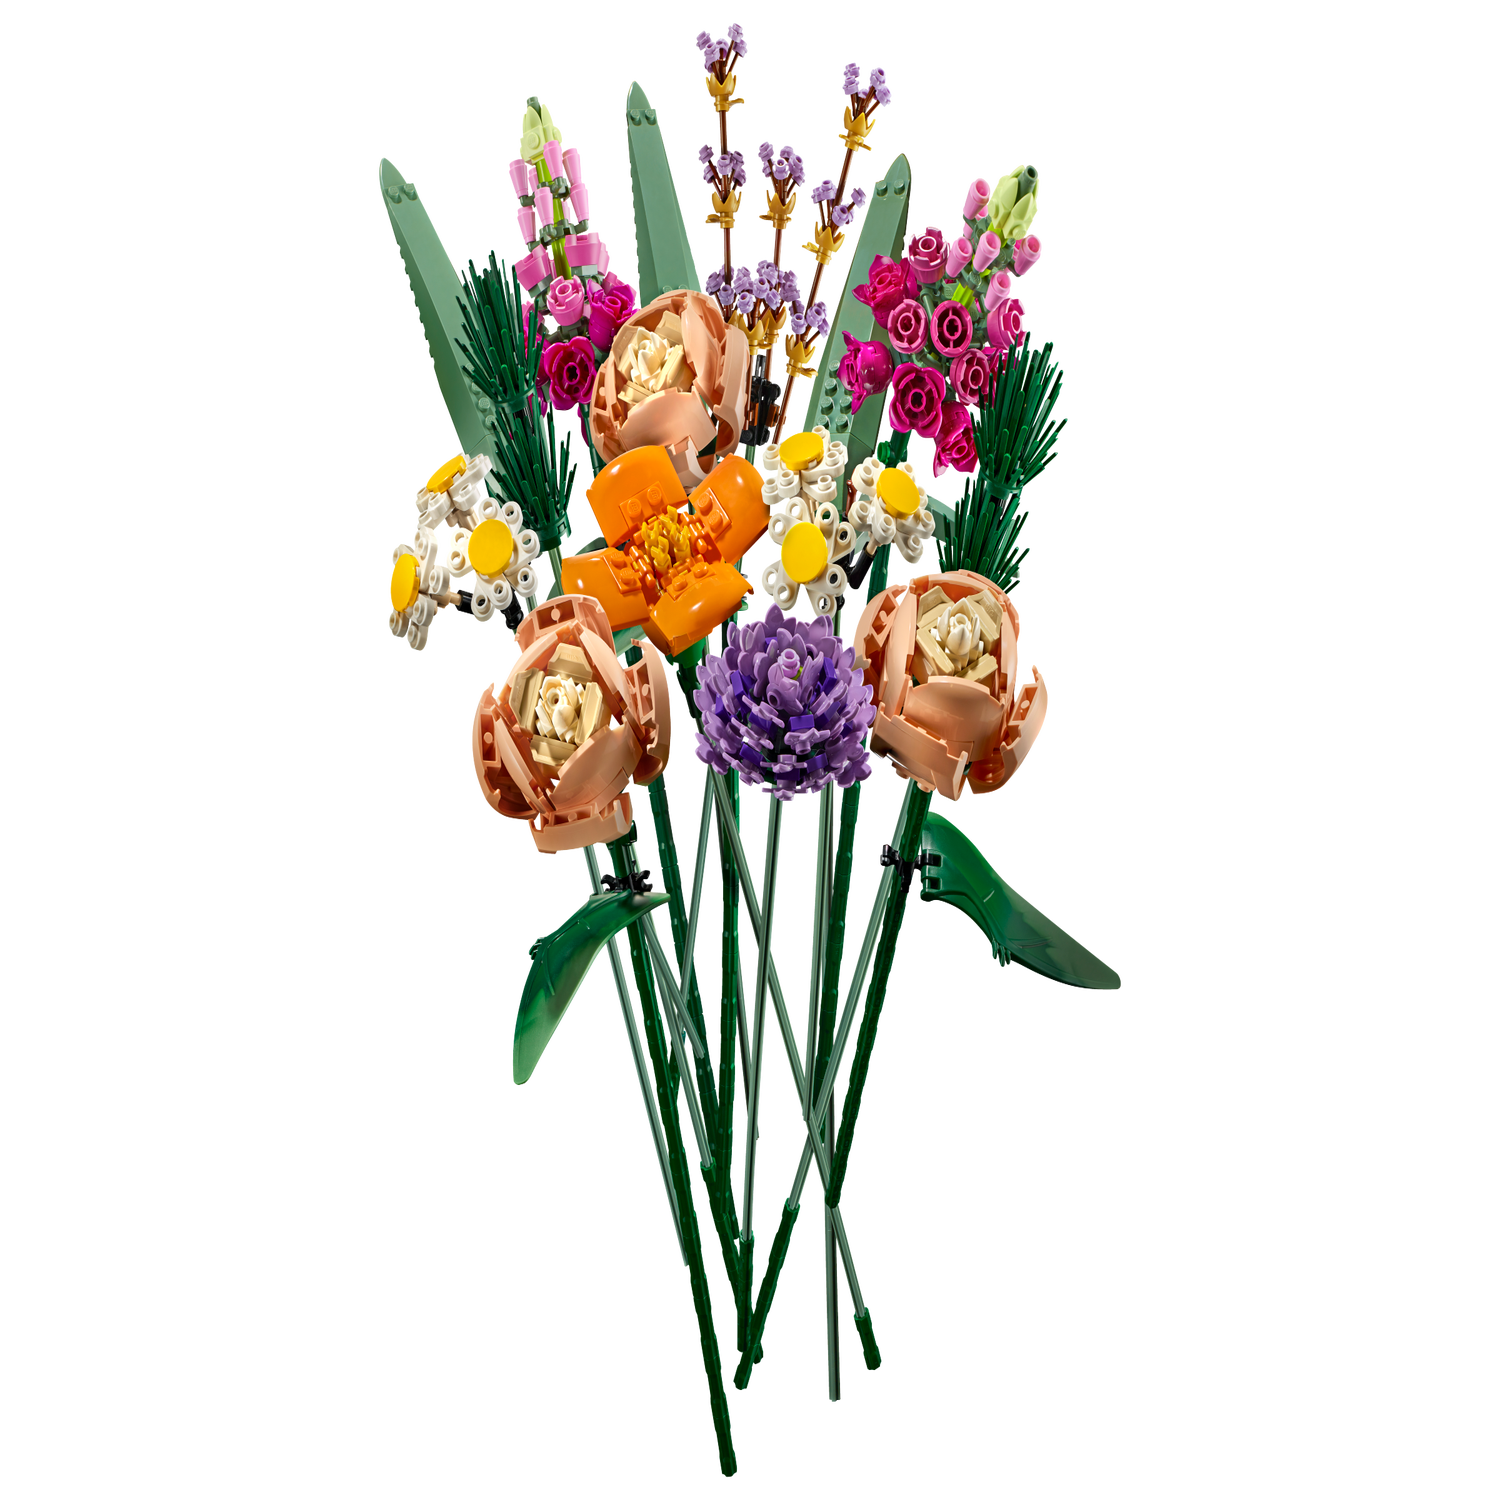 Flower Bouquet 10280  The Botanical Collection - LEGO